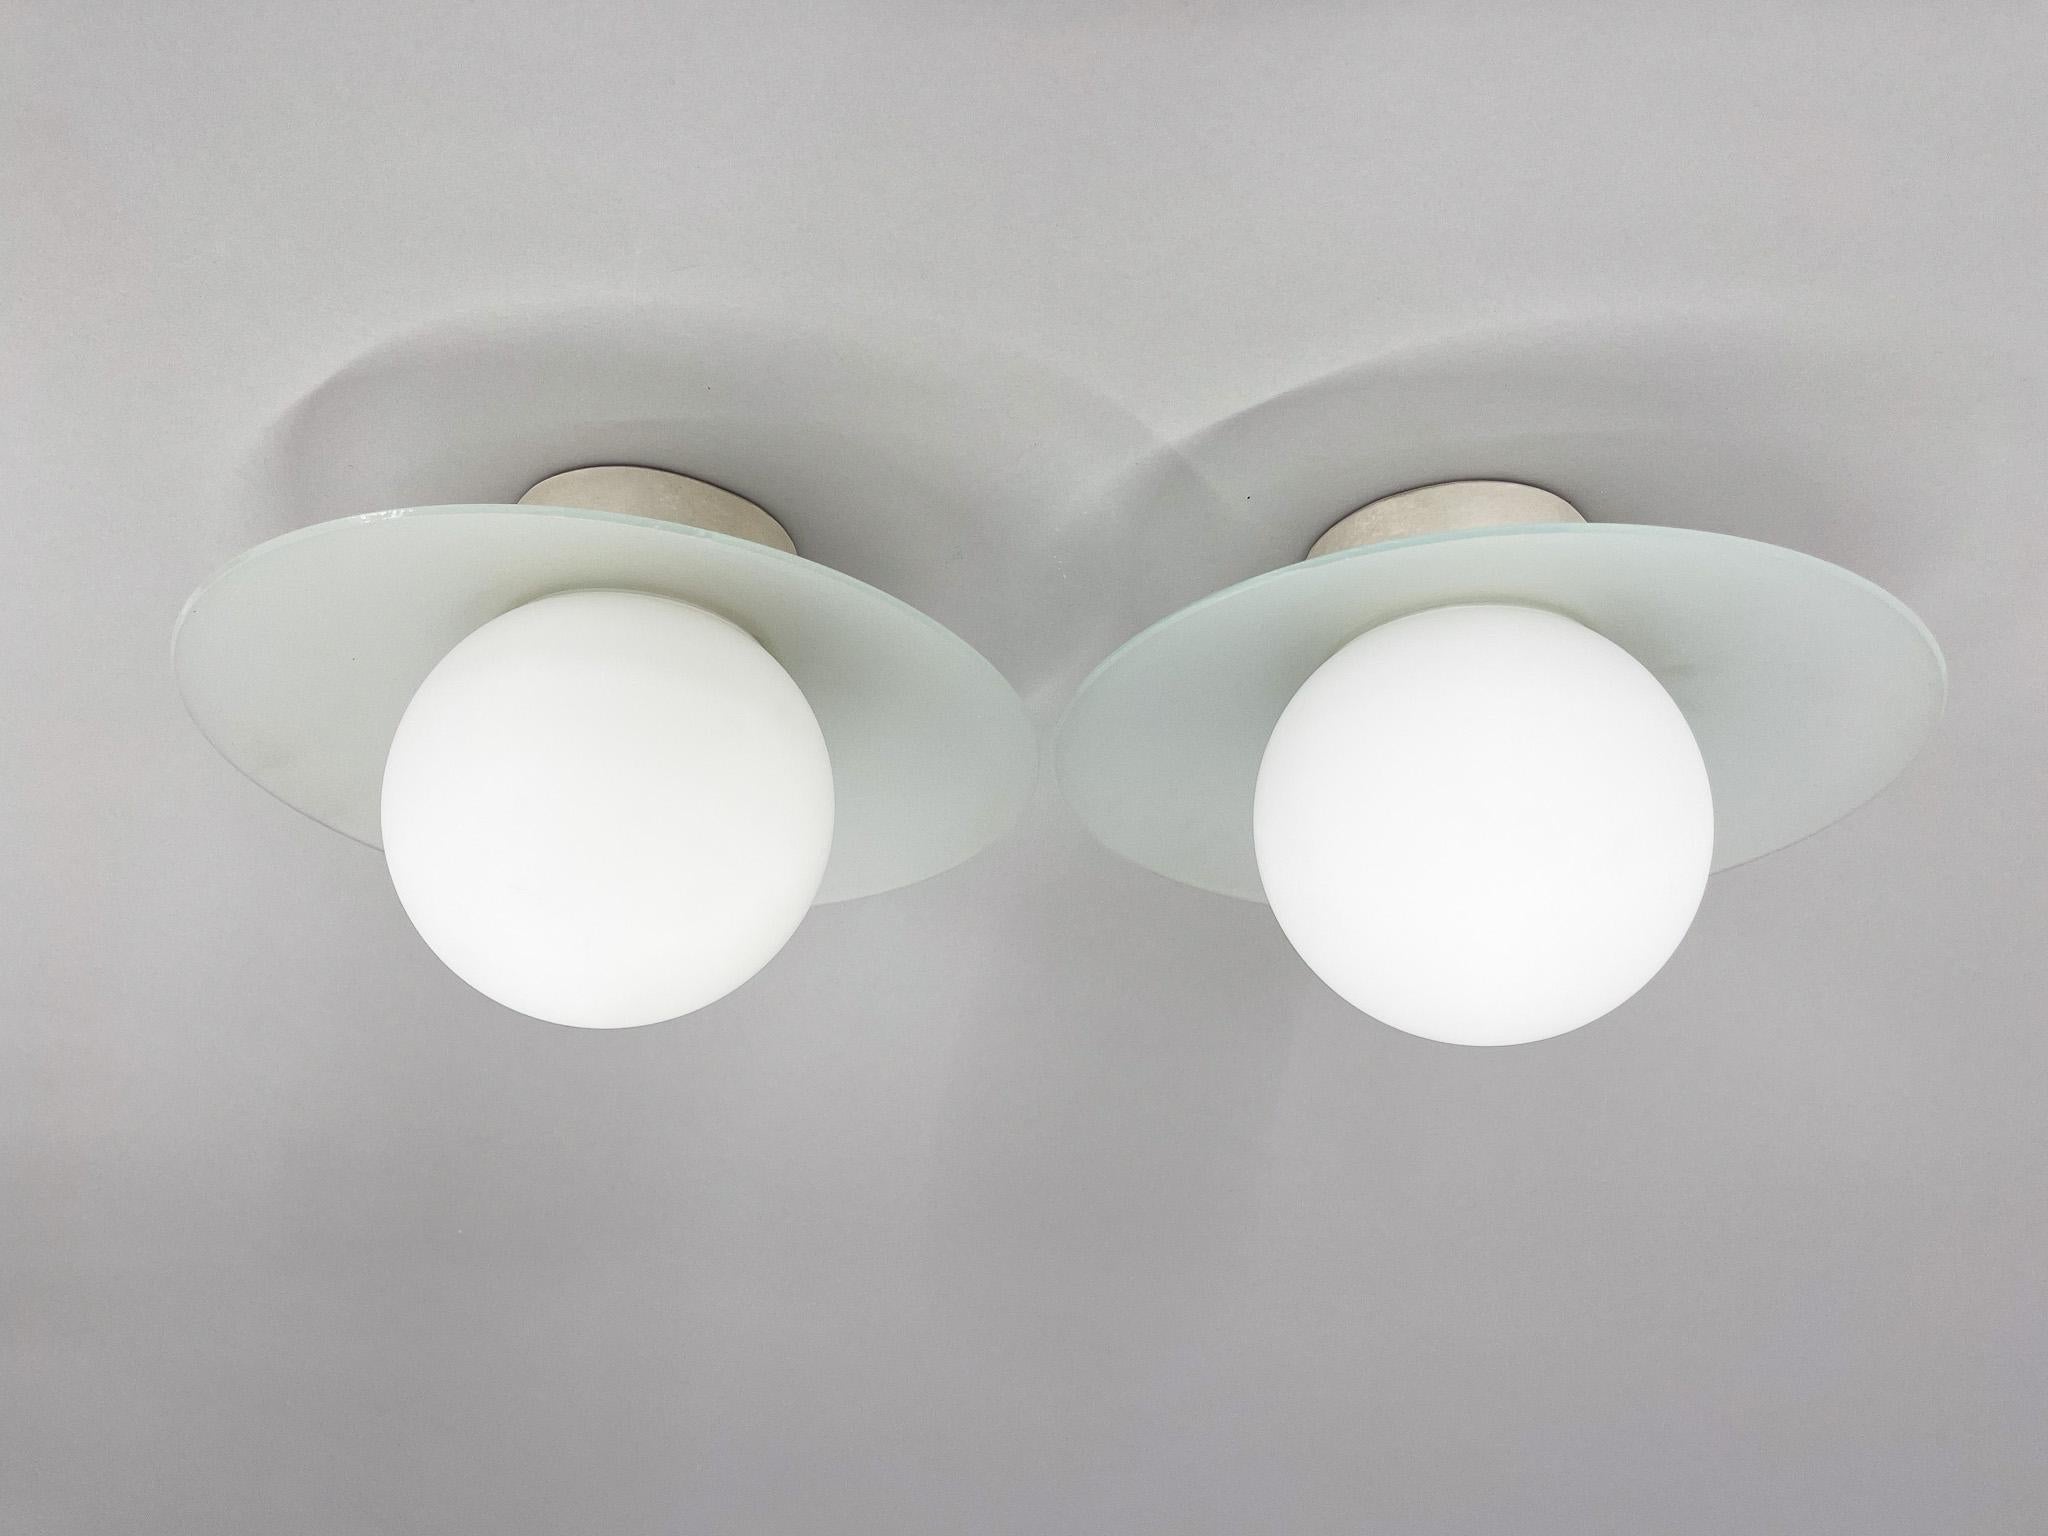 Czech Pair of Space Age Glass & Ceramic Ceiling Lights, 1950's